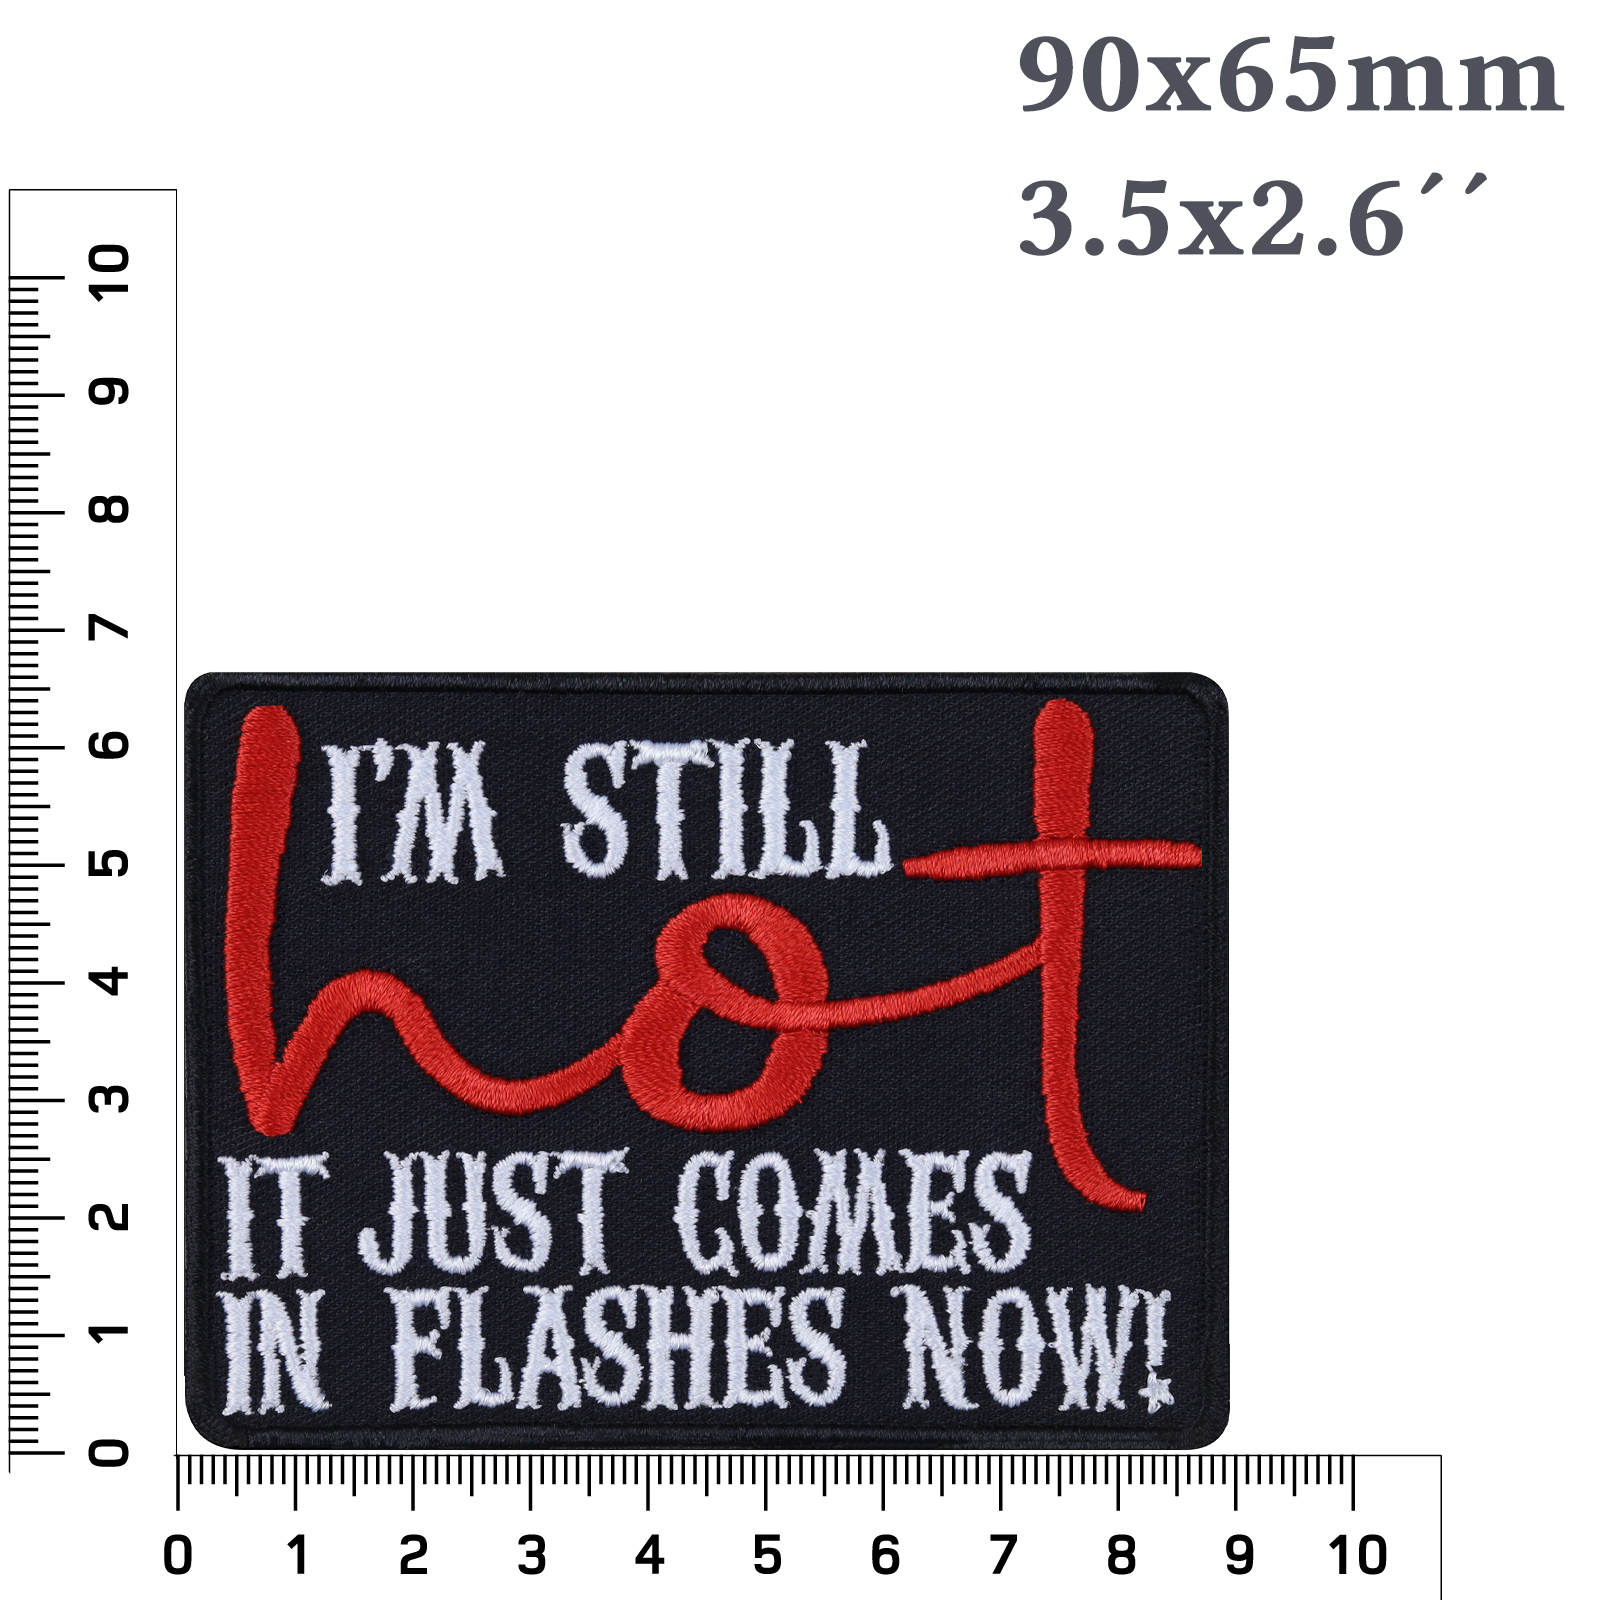 I'm still hot (It just comes in flashes now!) - Patch